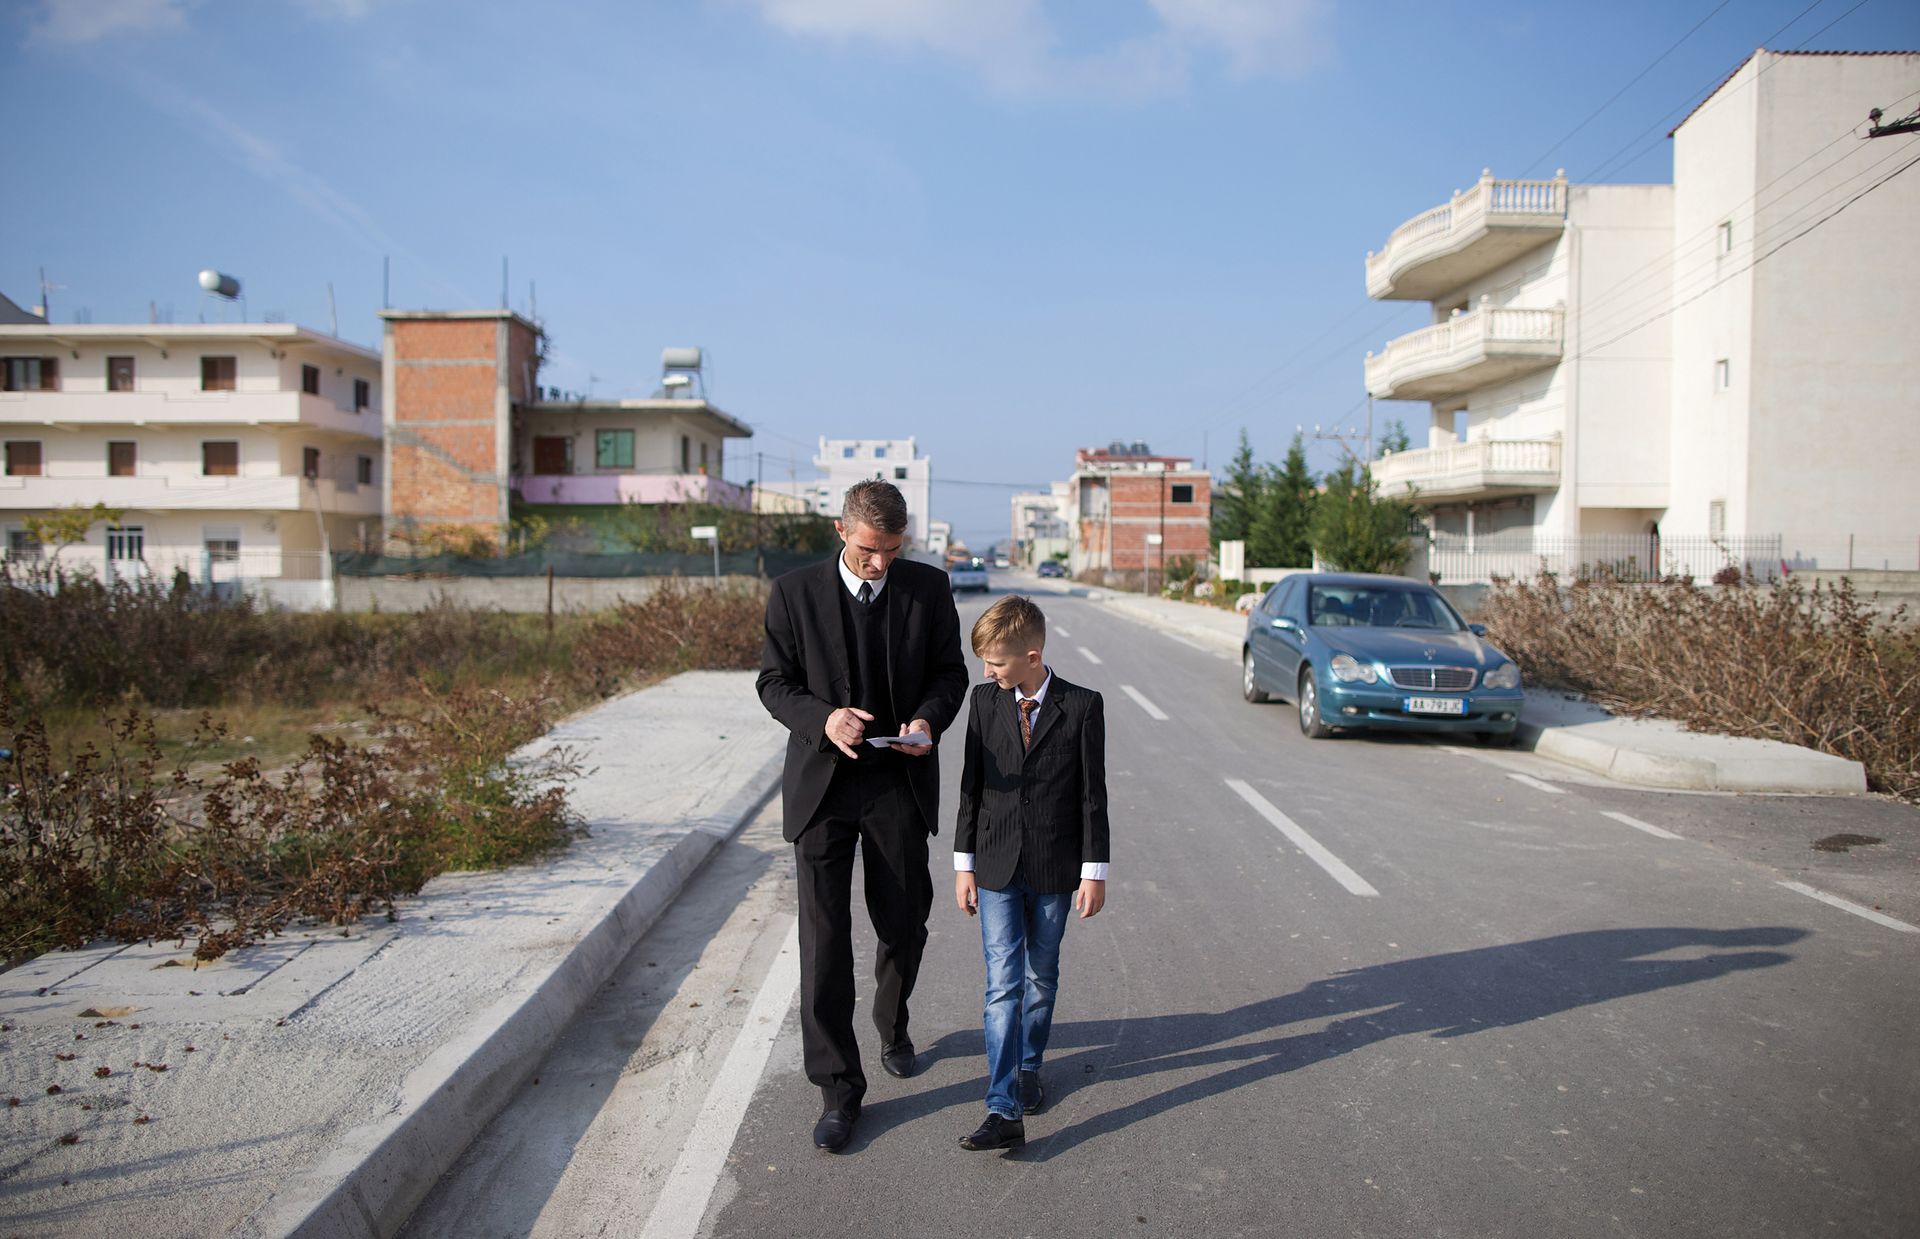 Ilir and his son walk through the streets of Durrës.